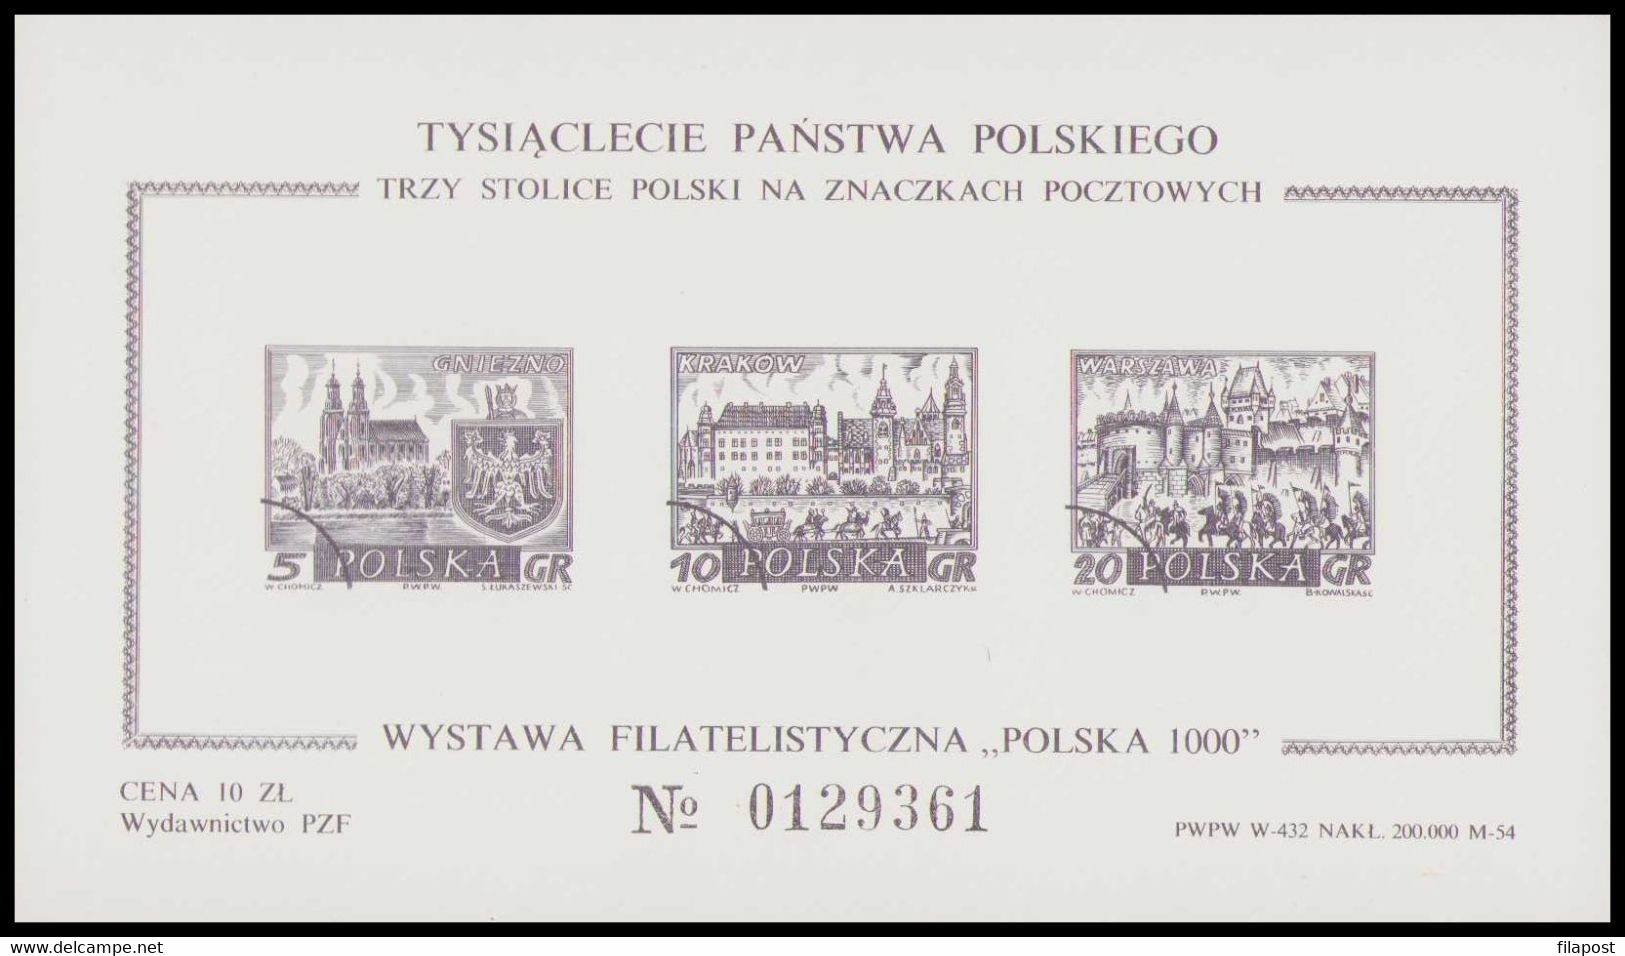 POLAND 1966 Millennium Of The Polish State - Official Reprint / Three Polish Capitals On Postage Stamps P70 - Proofs & Reprints